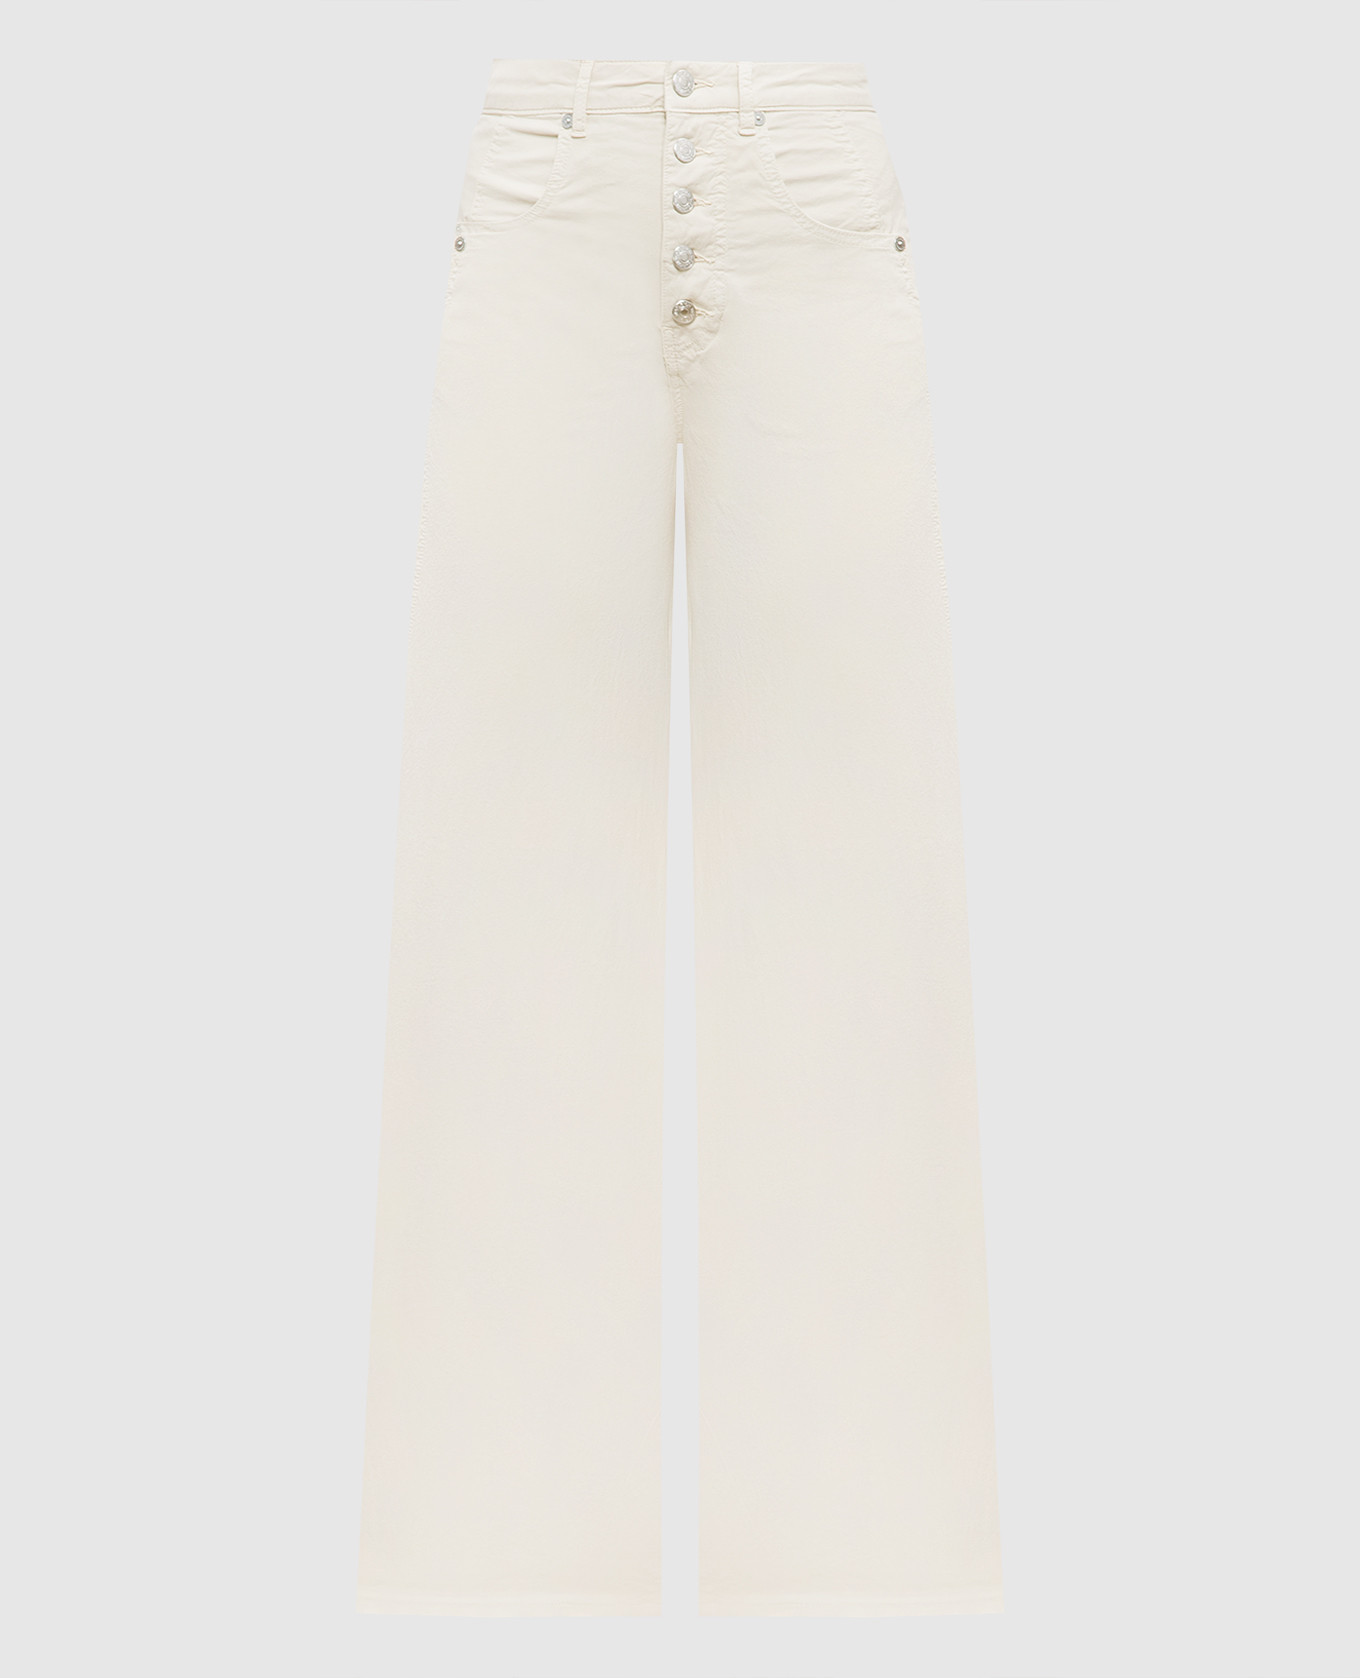 Beige pants with logo patch